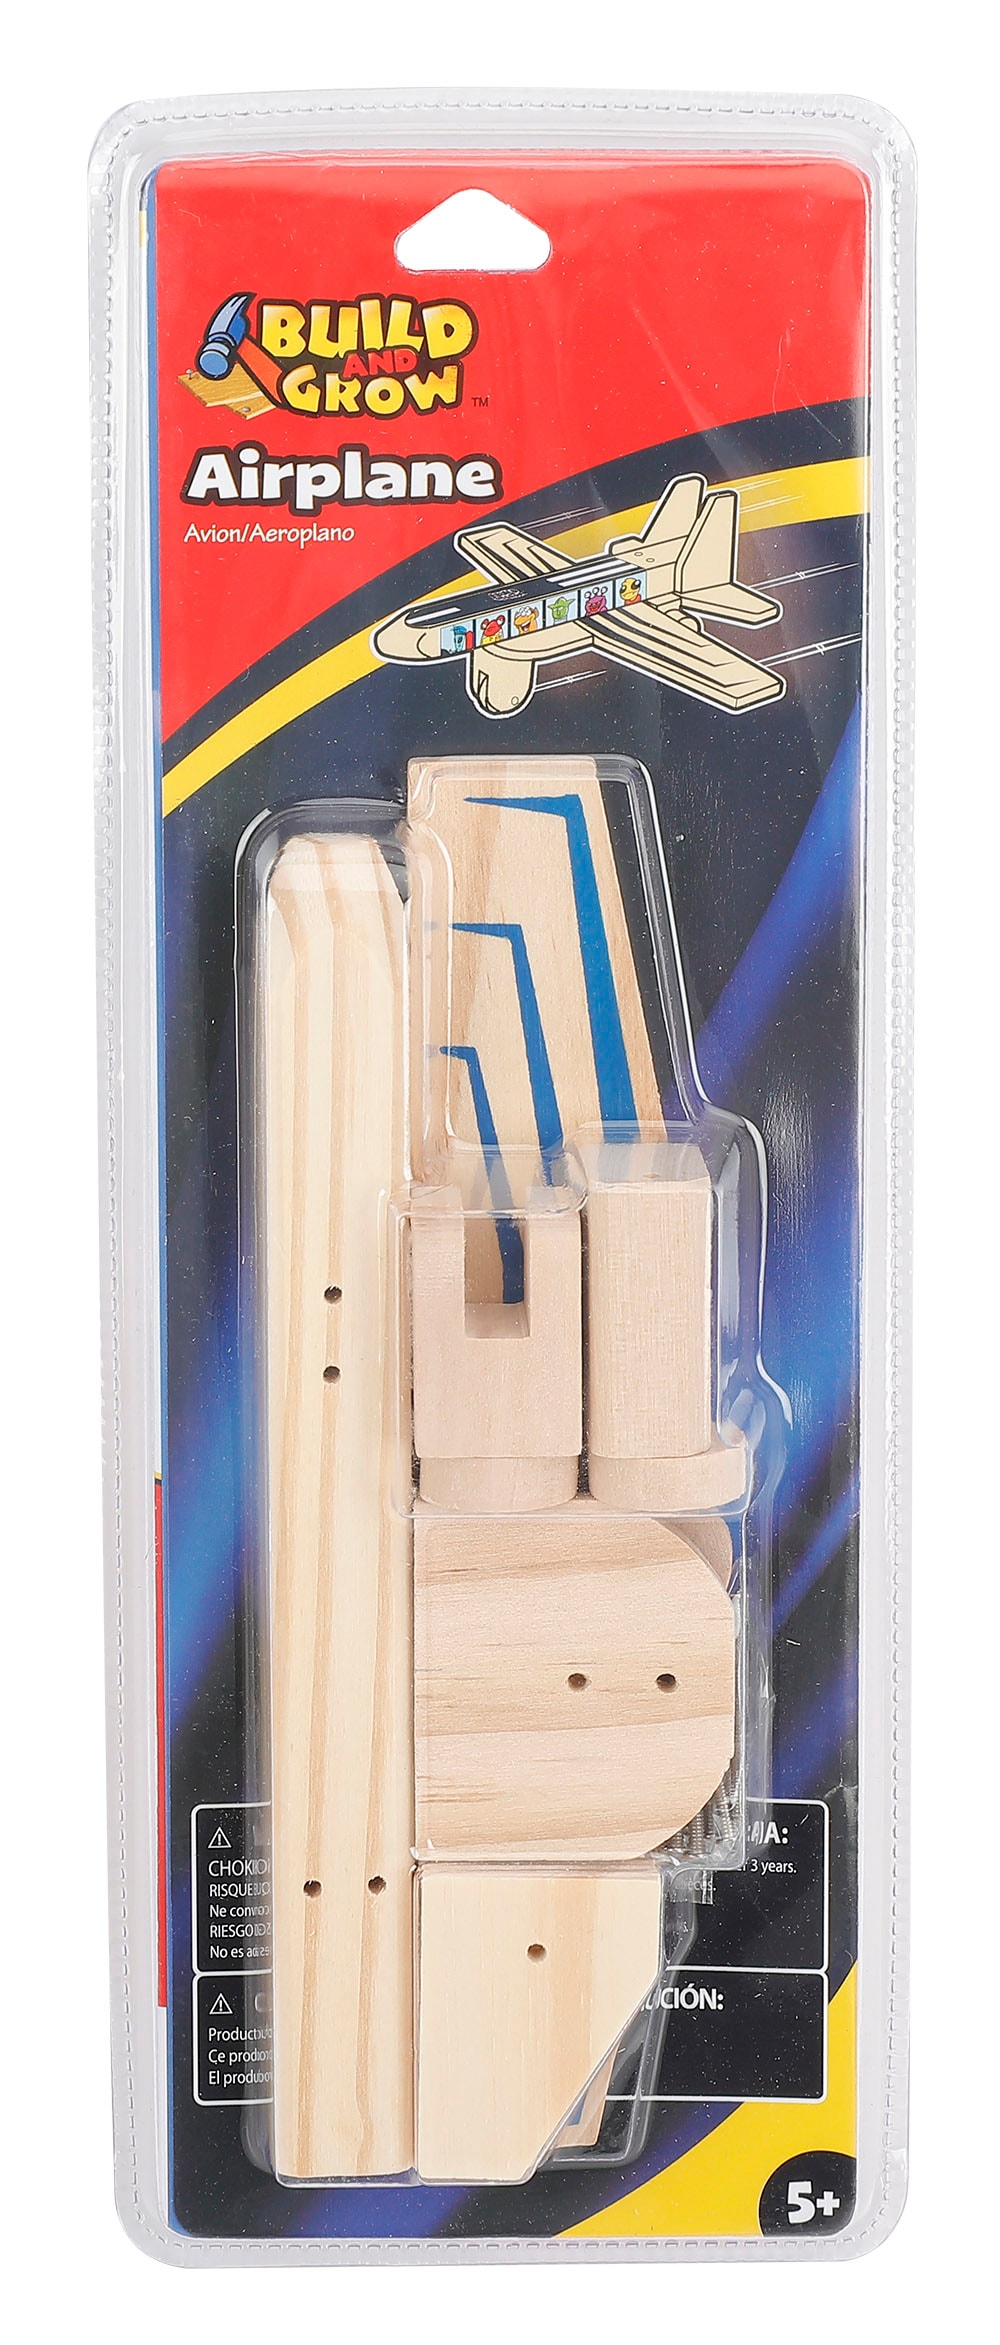 Revell Kid's Beginner Pinewood Derby Project Kit at